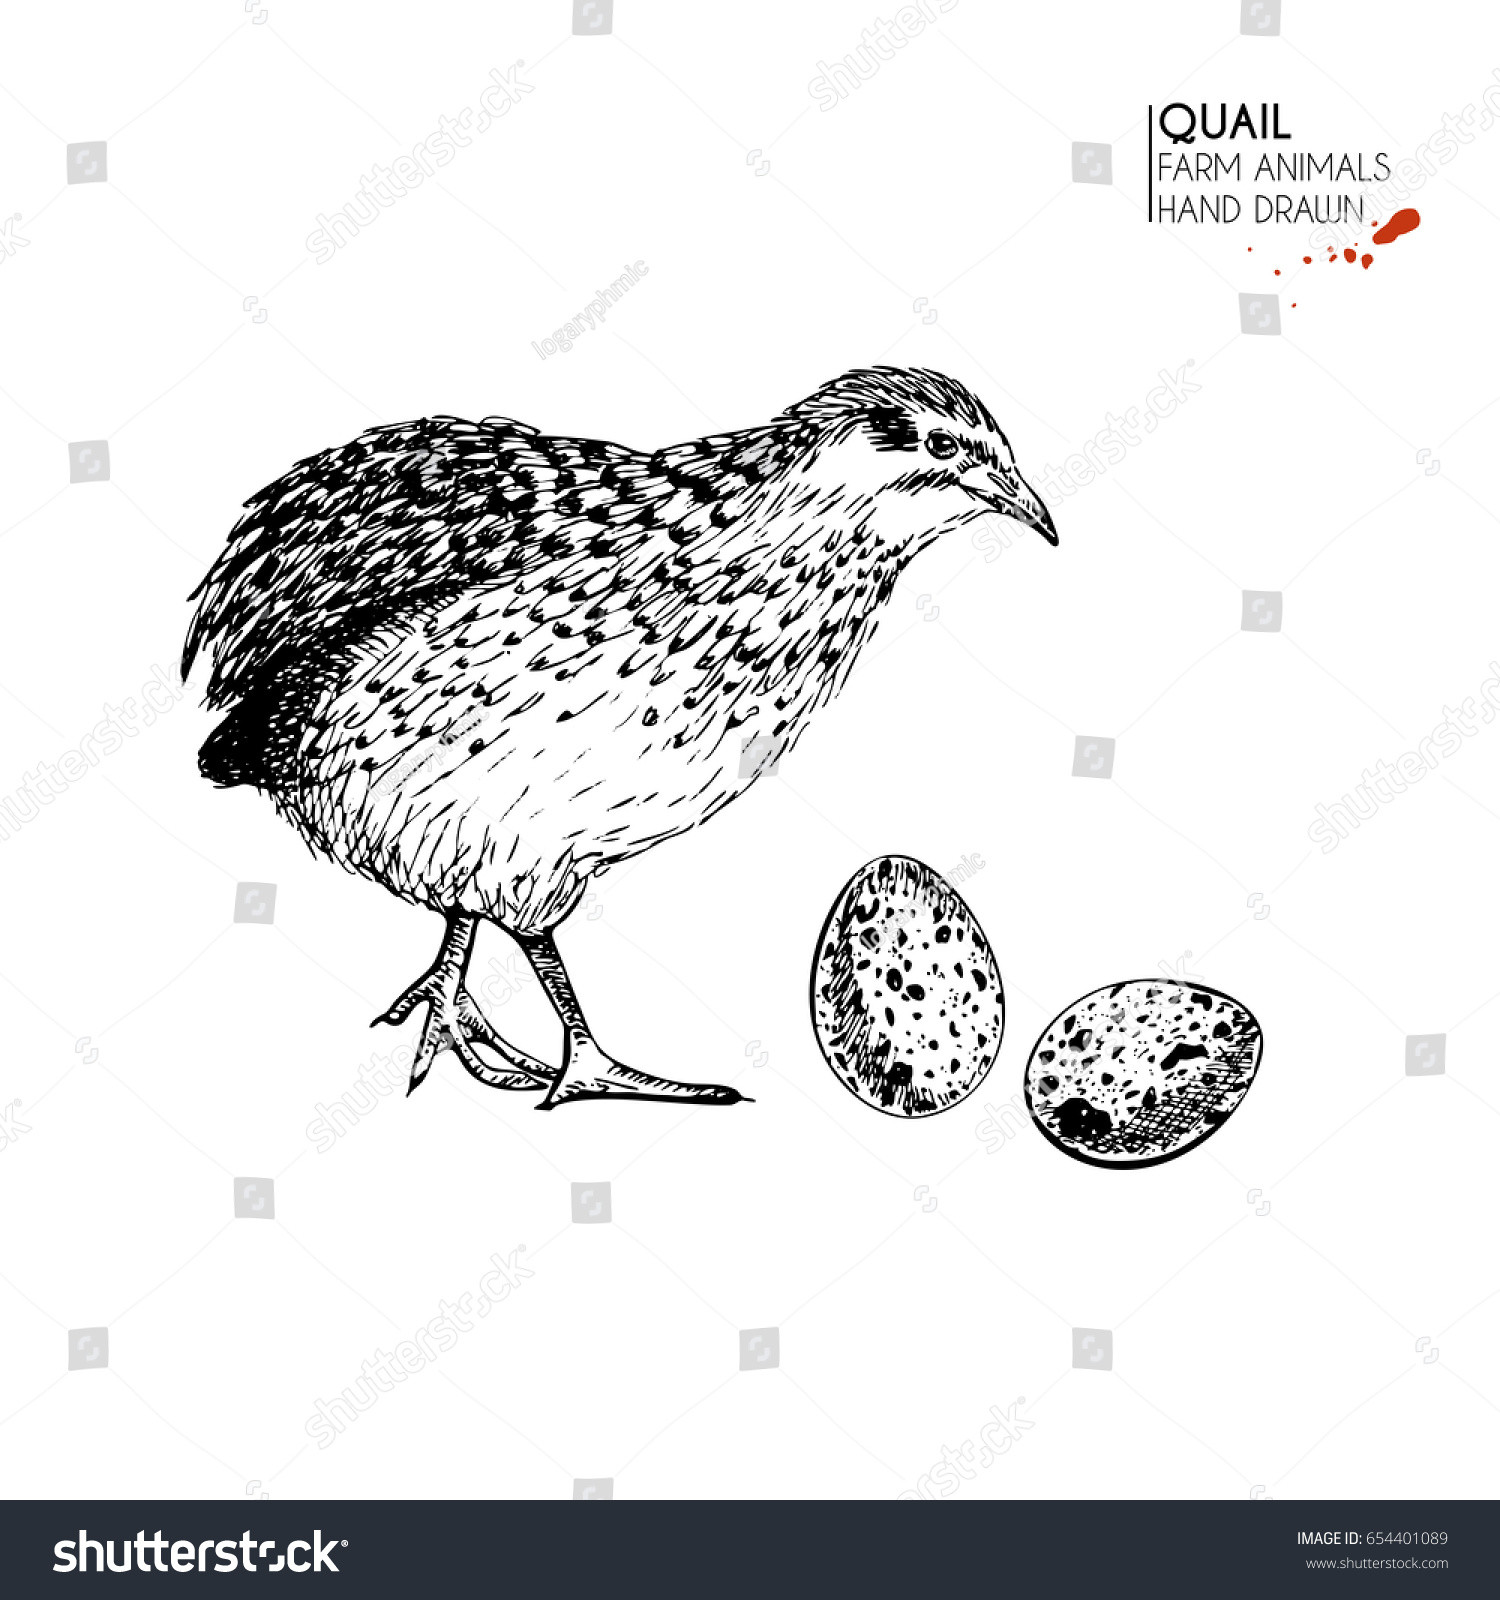 stock vector vector hand drawn set of farm animals isolated quail bird and eggs engraved art organic sketched